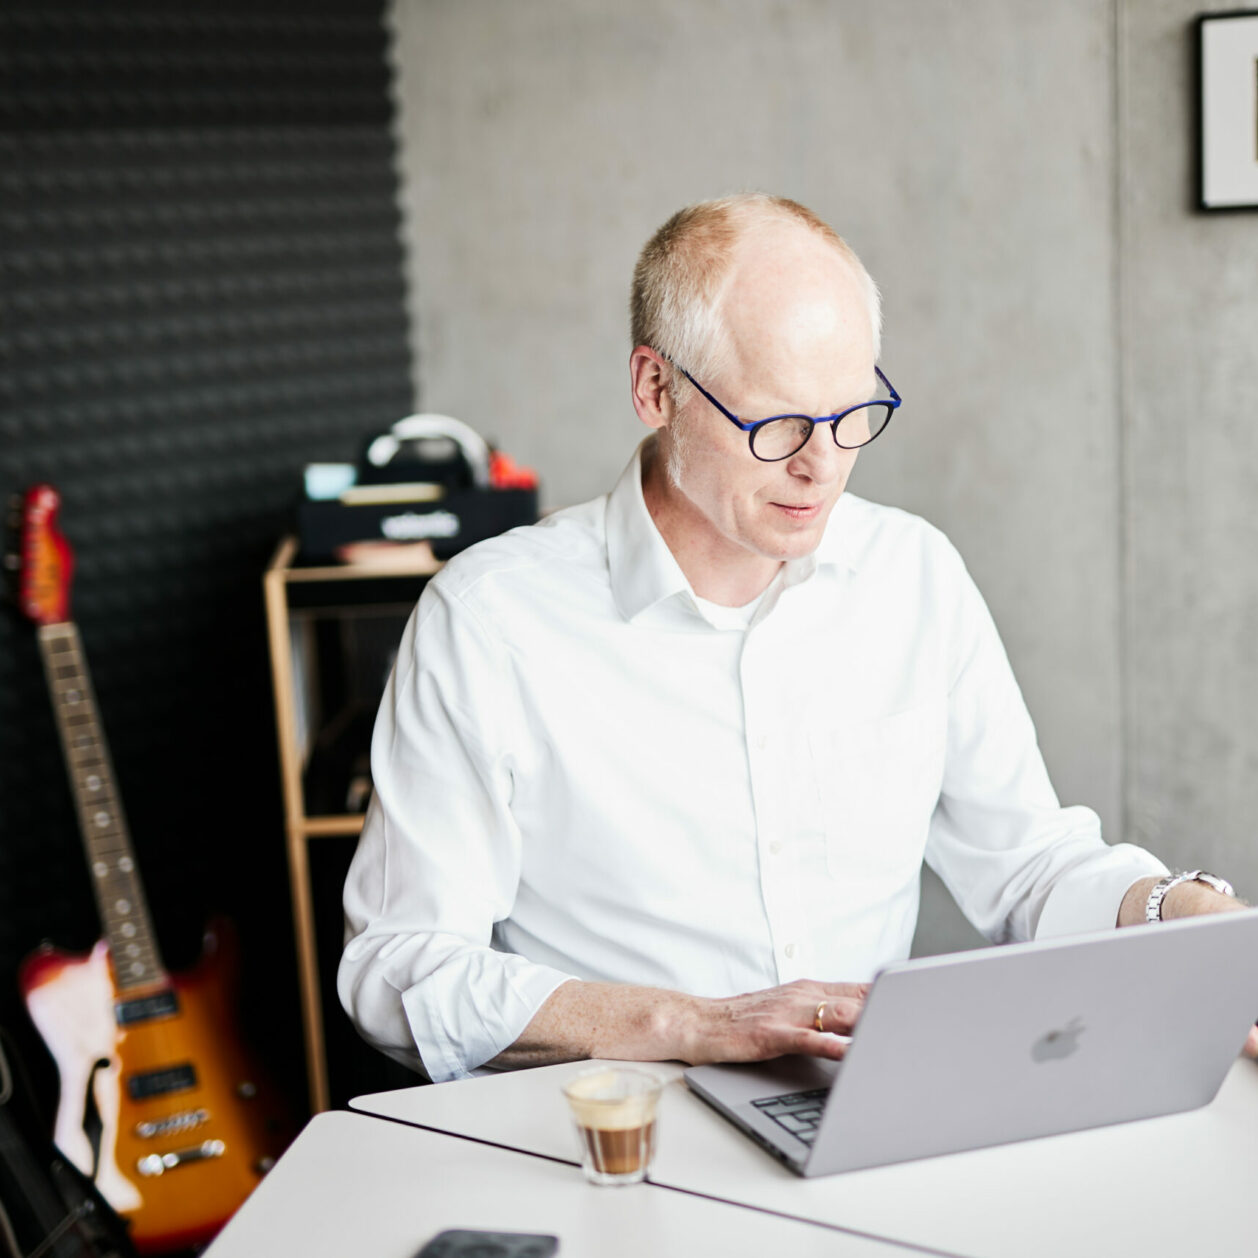 An older man working on his laptop and reaching for his smartphone – electric guitars can be seen in the background.